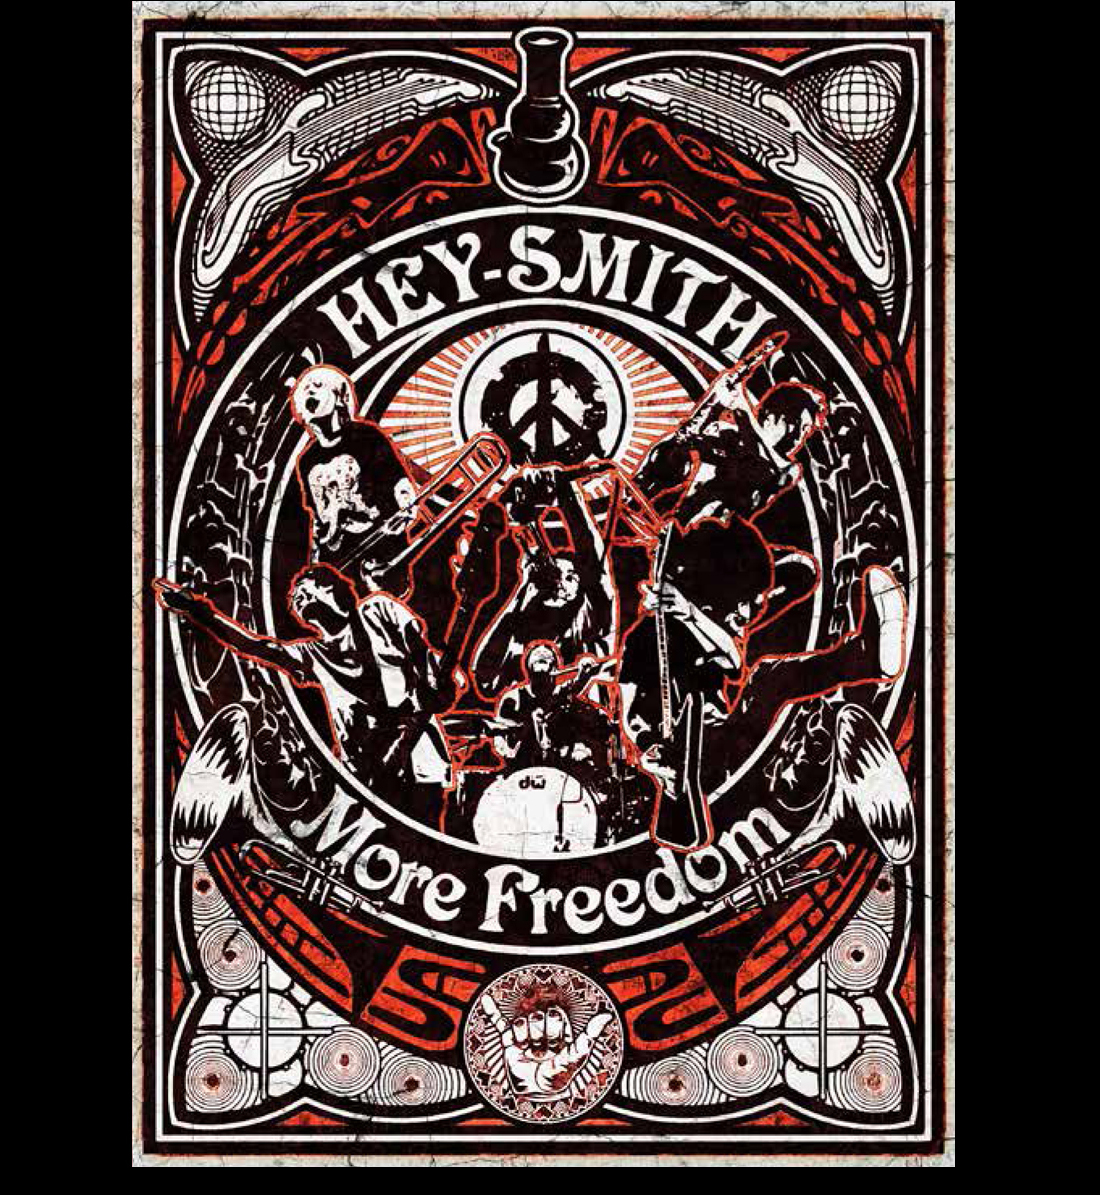 HEY-SMITH NEW DVD「More Freedom」